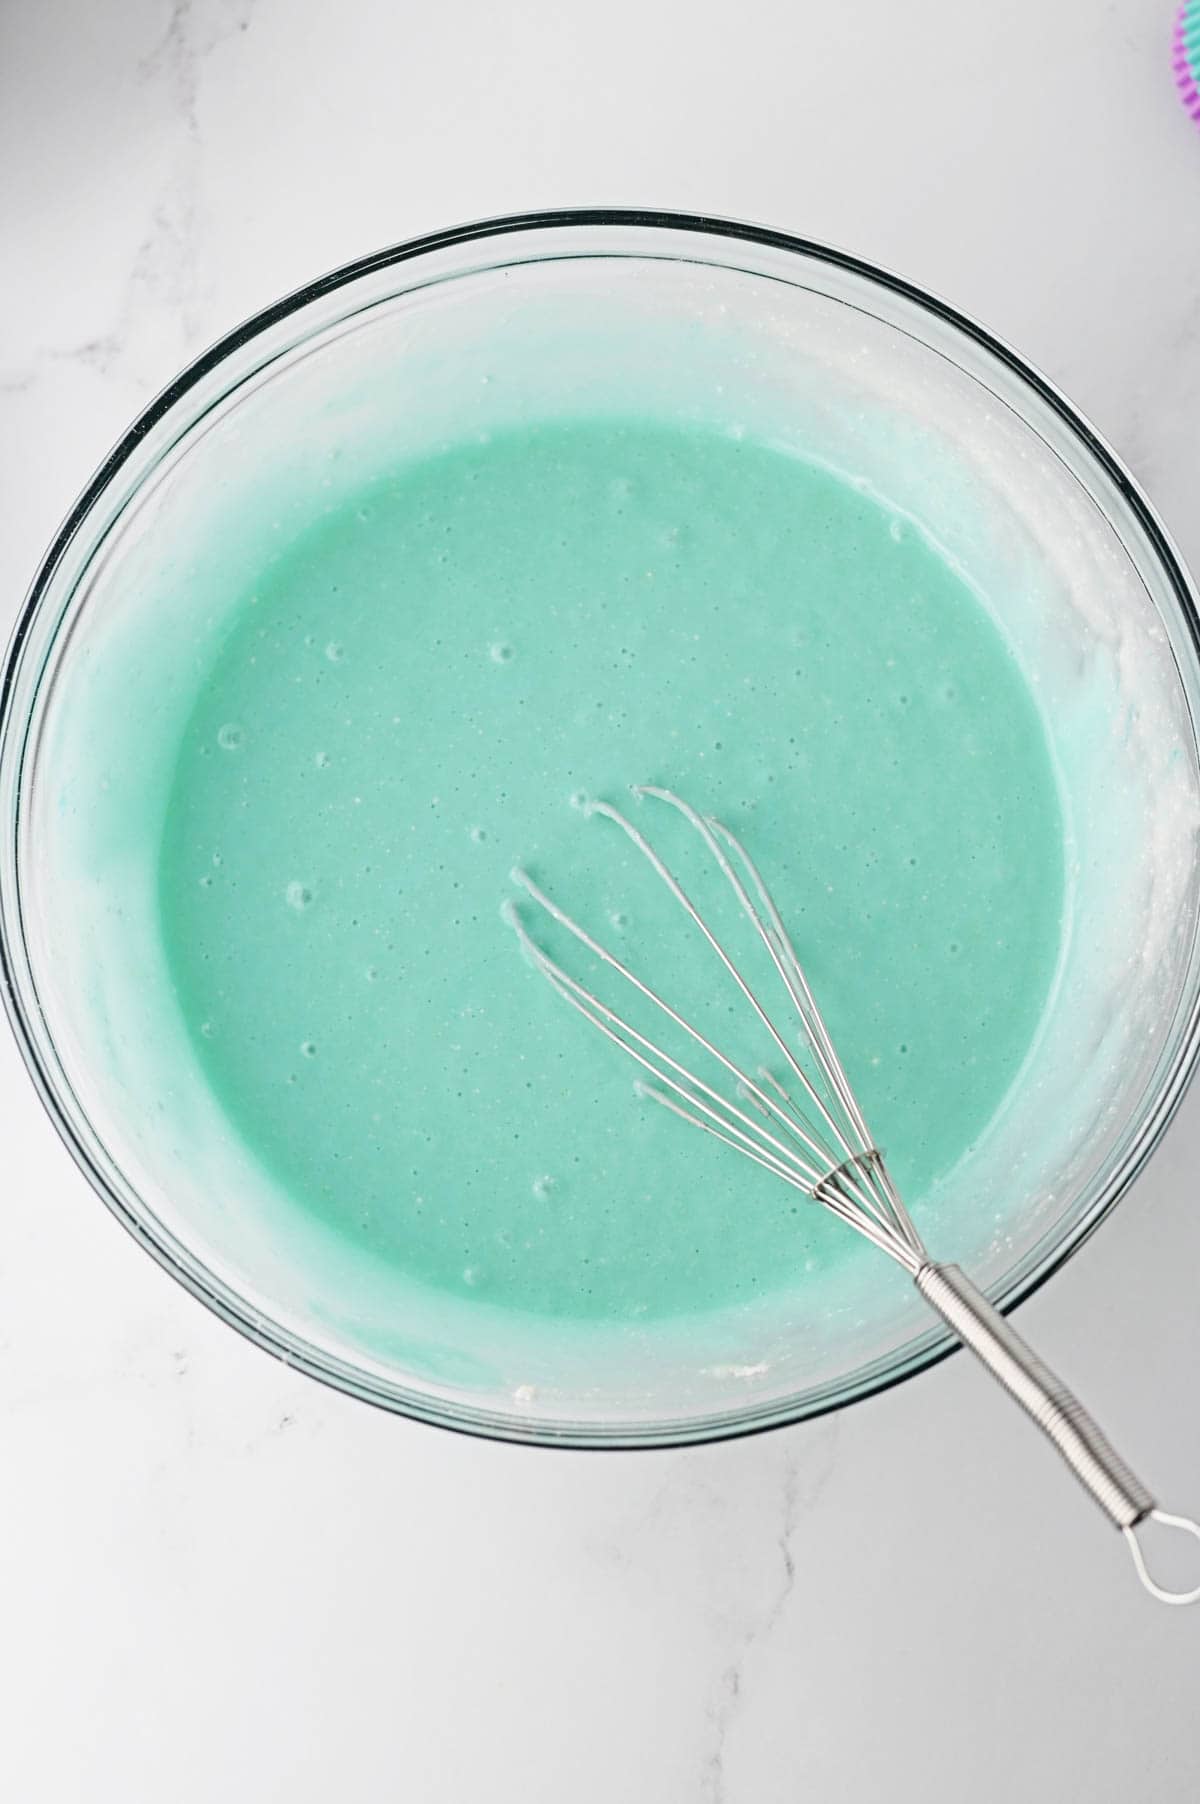 Cake batter with blue food coloring in glass bowl